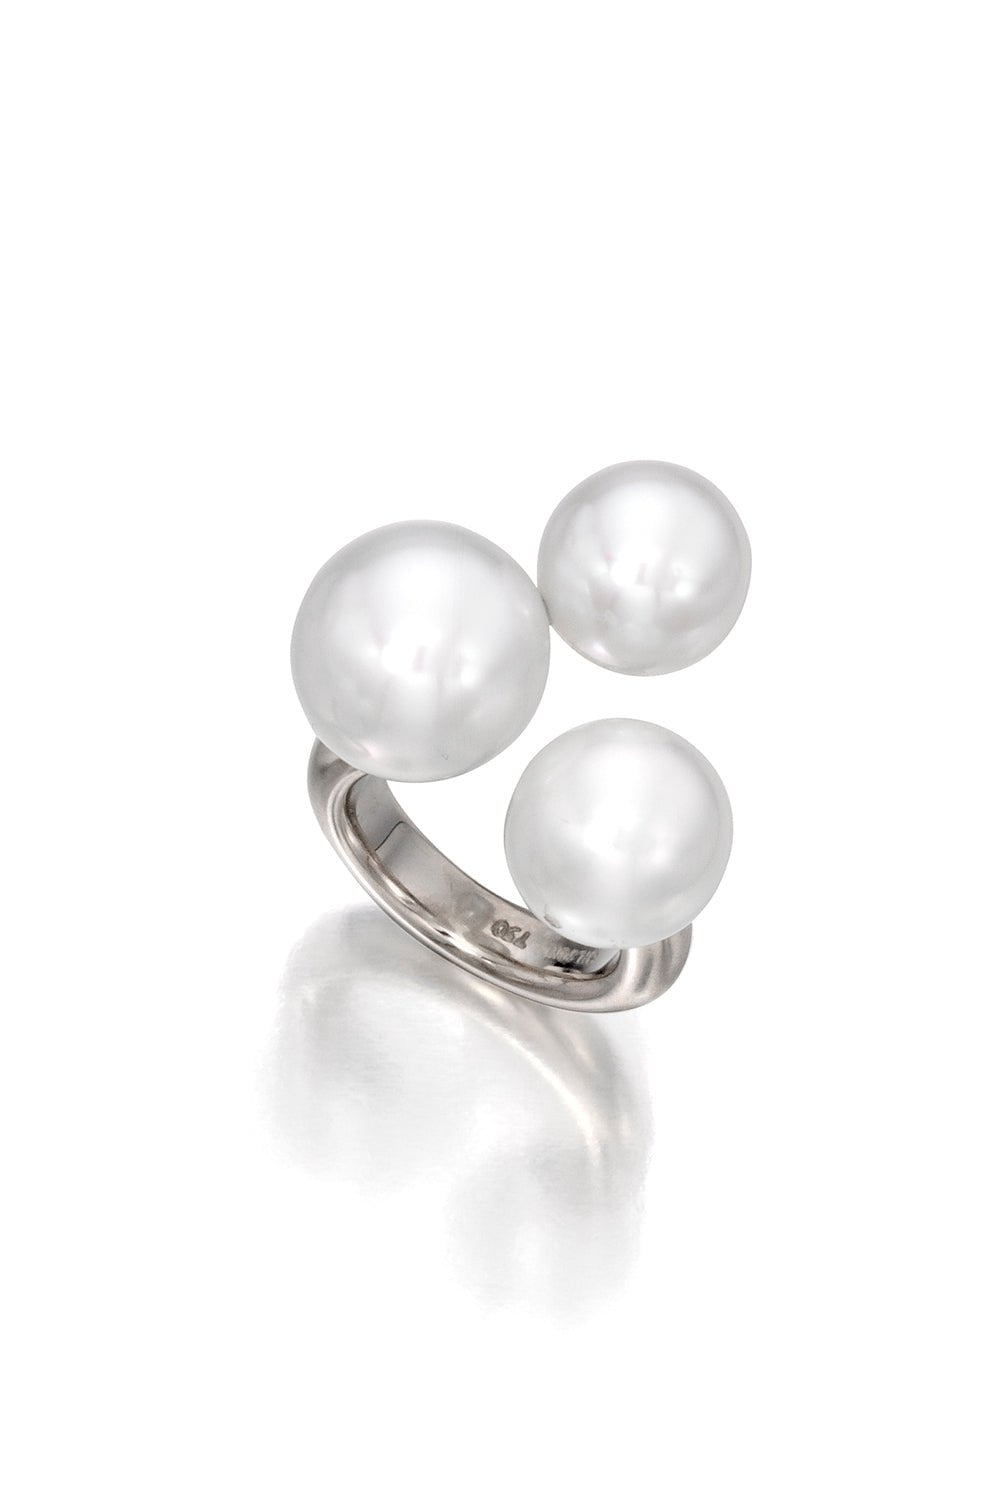 ASSAEL-Three Bubble Pearl Ring-WHITE GOLD